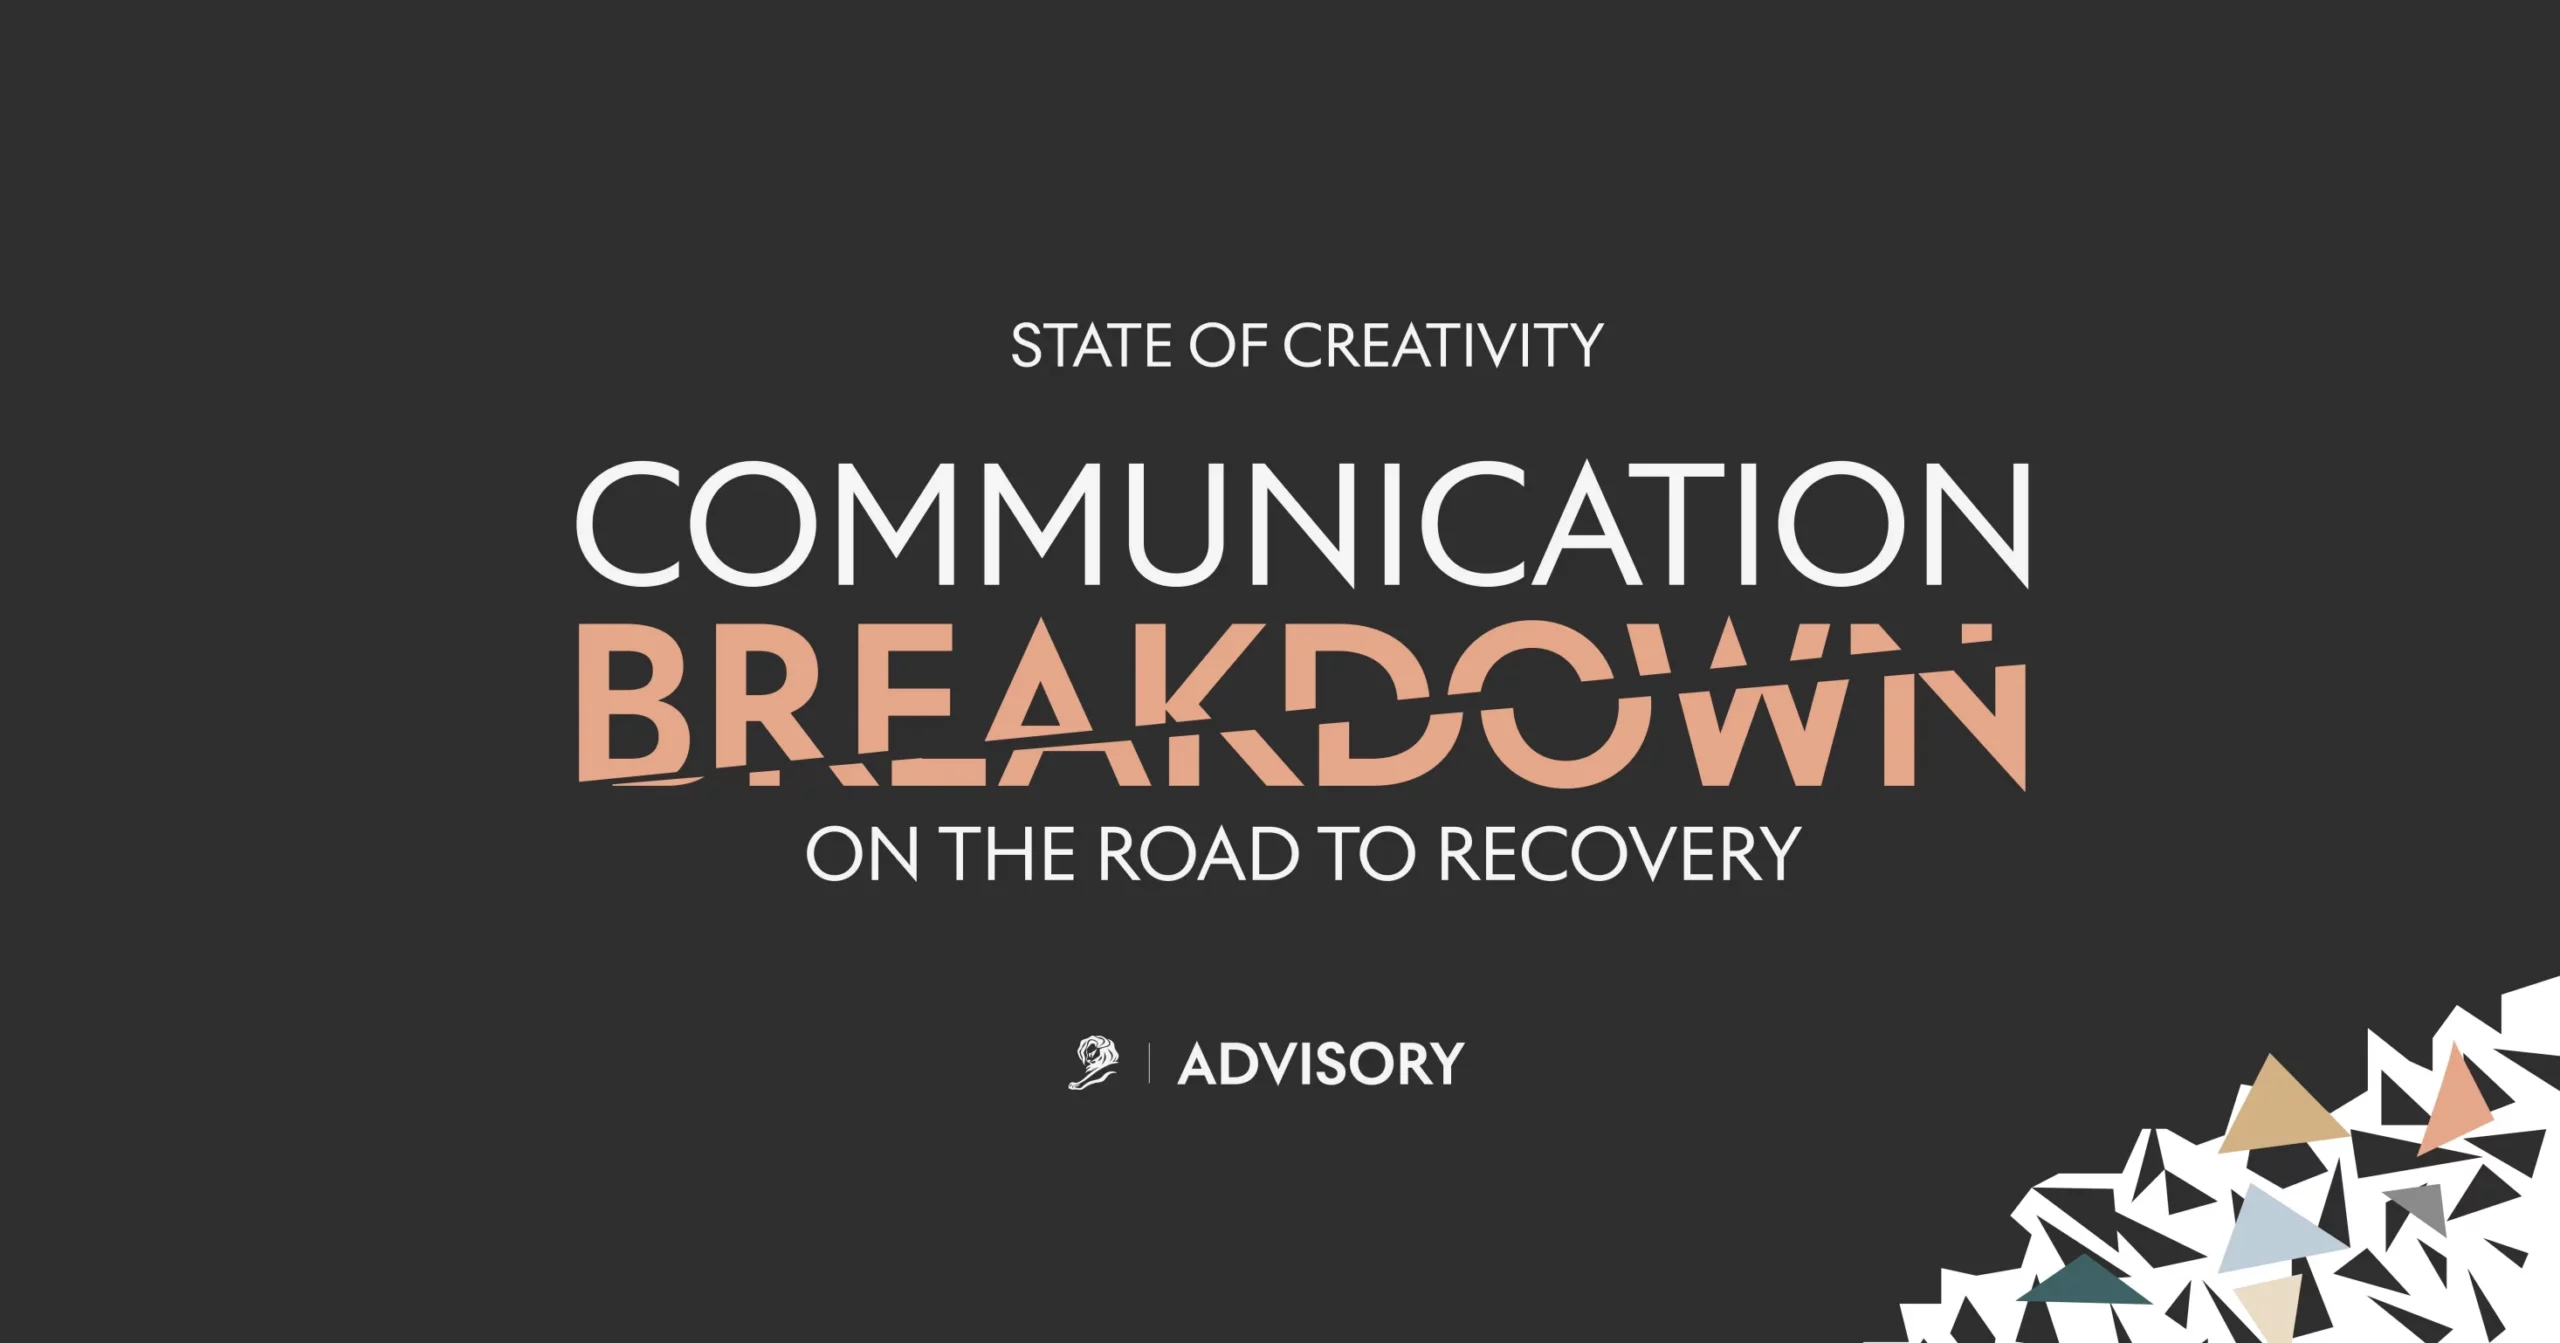 Graphical presentation highlighting communication breakdown and recovery in a creative state with advisory text and geometric shapes.